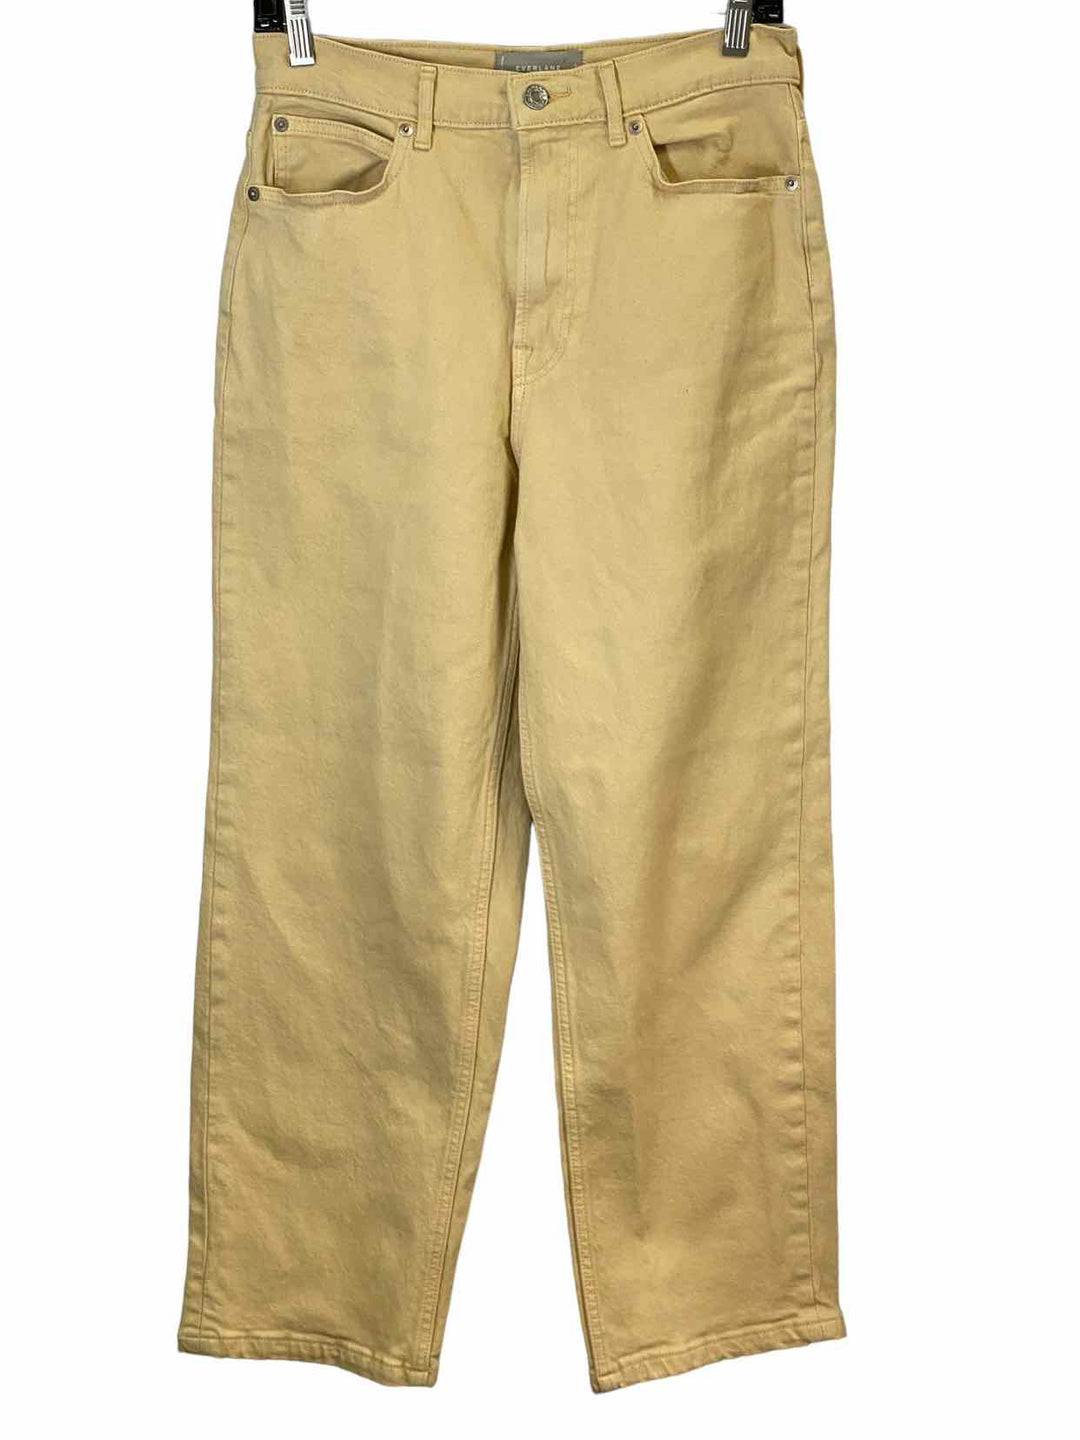 Everlane Size 27 Yellow Jeans